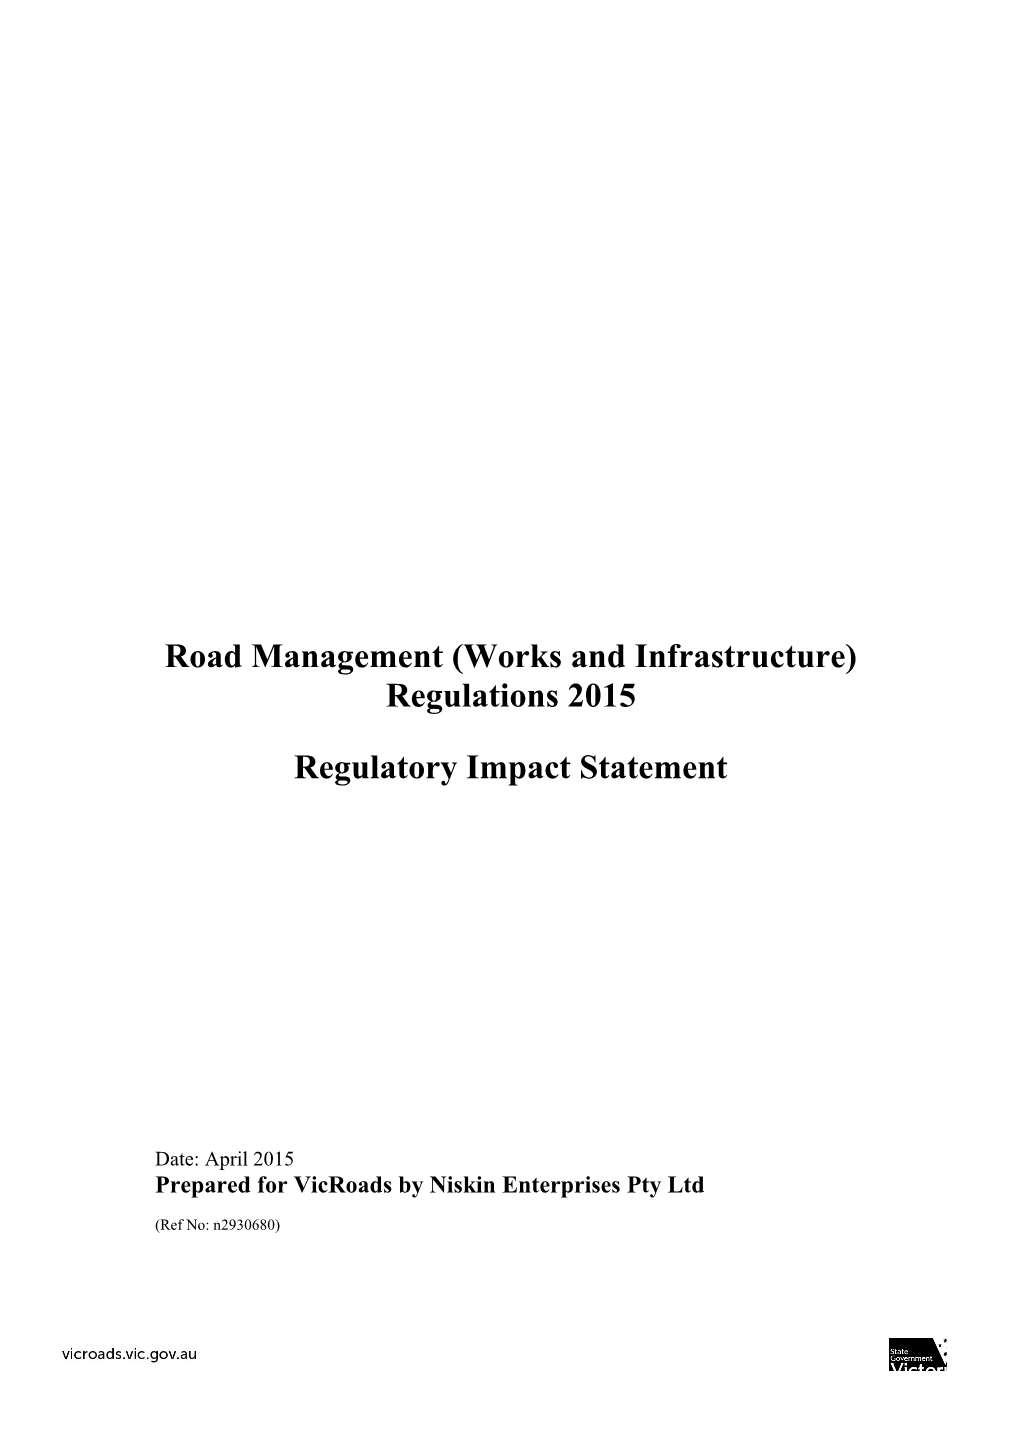 Road Management (Works and Infrastructure) Regulations 2015